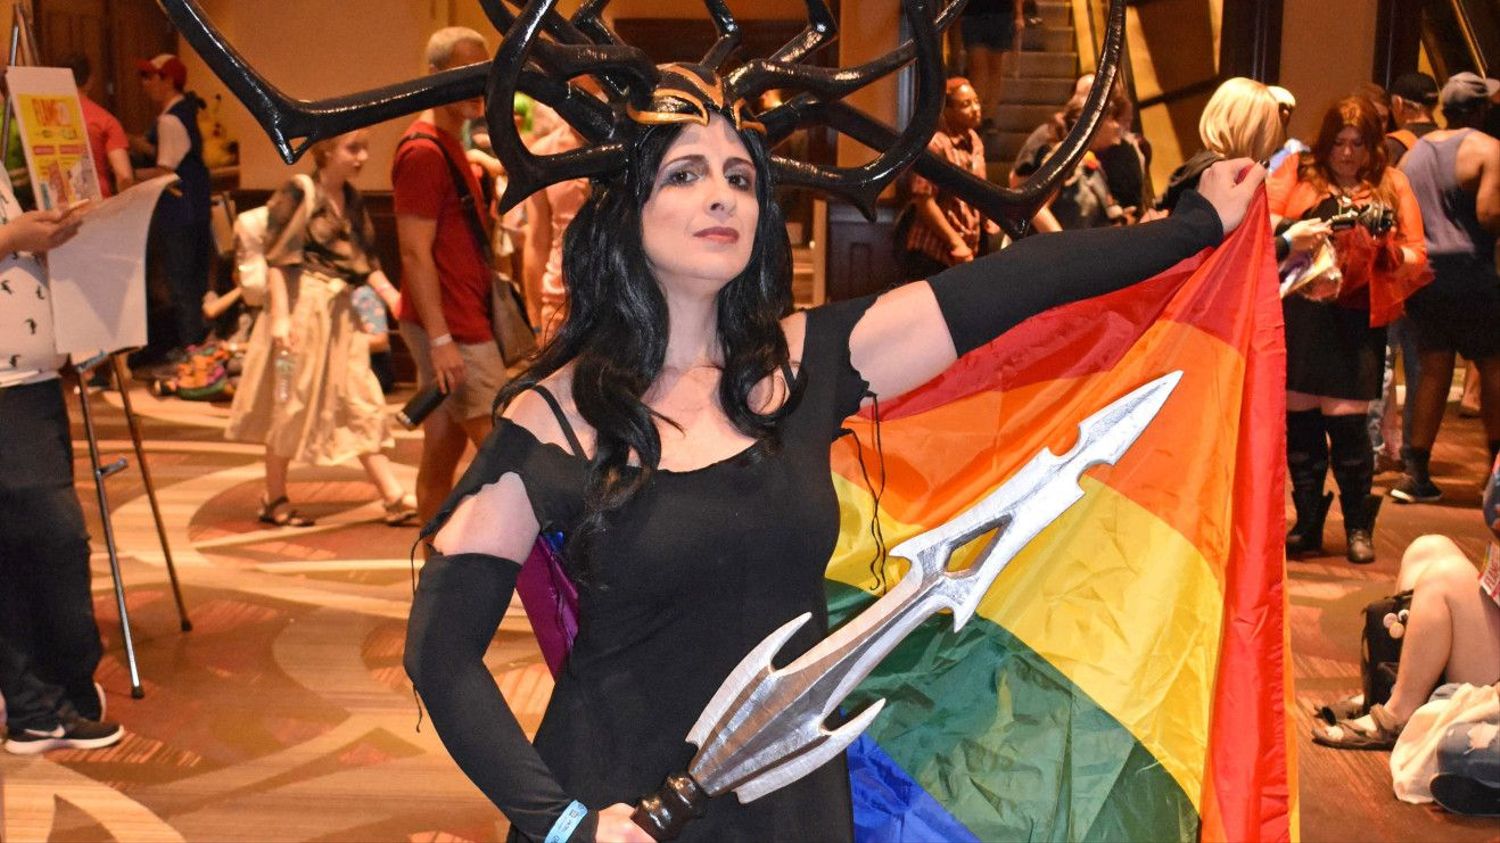 “Sabrina” Cosplay and Gay Mutant Love: 5 Takeaways From Flame Con 2019